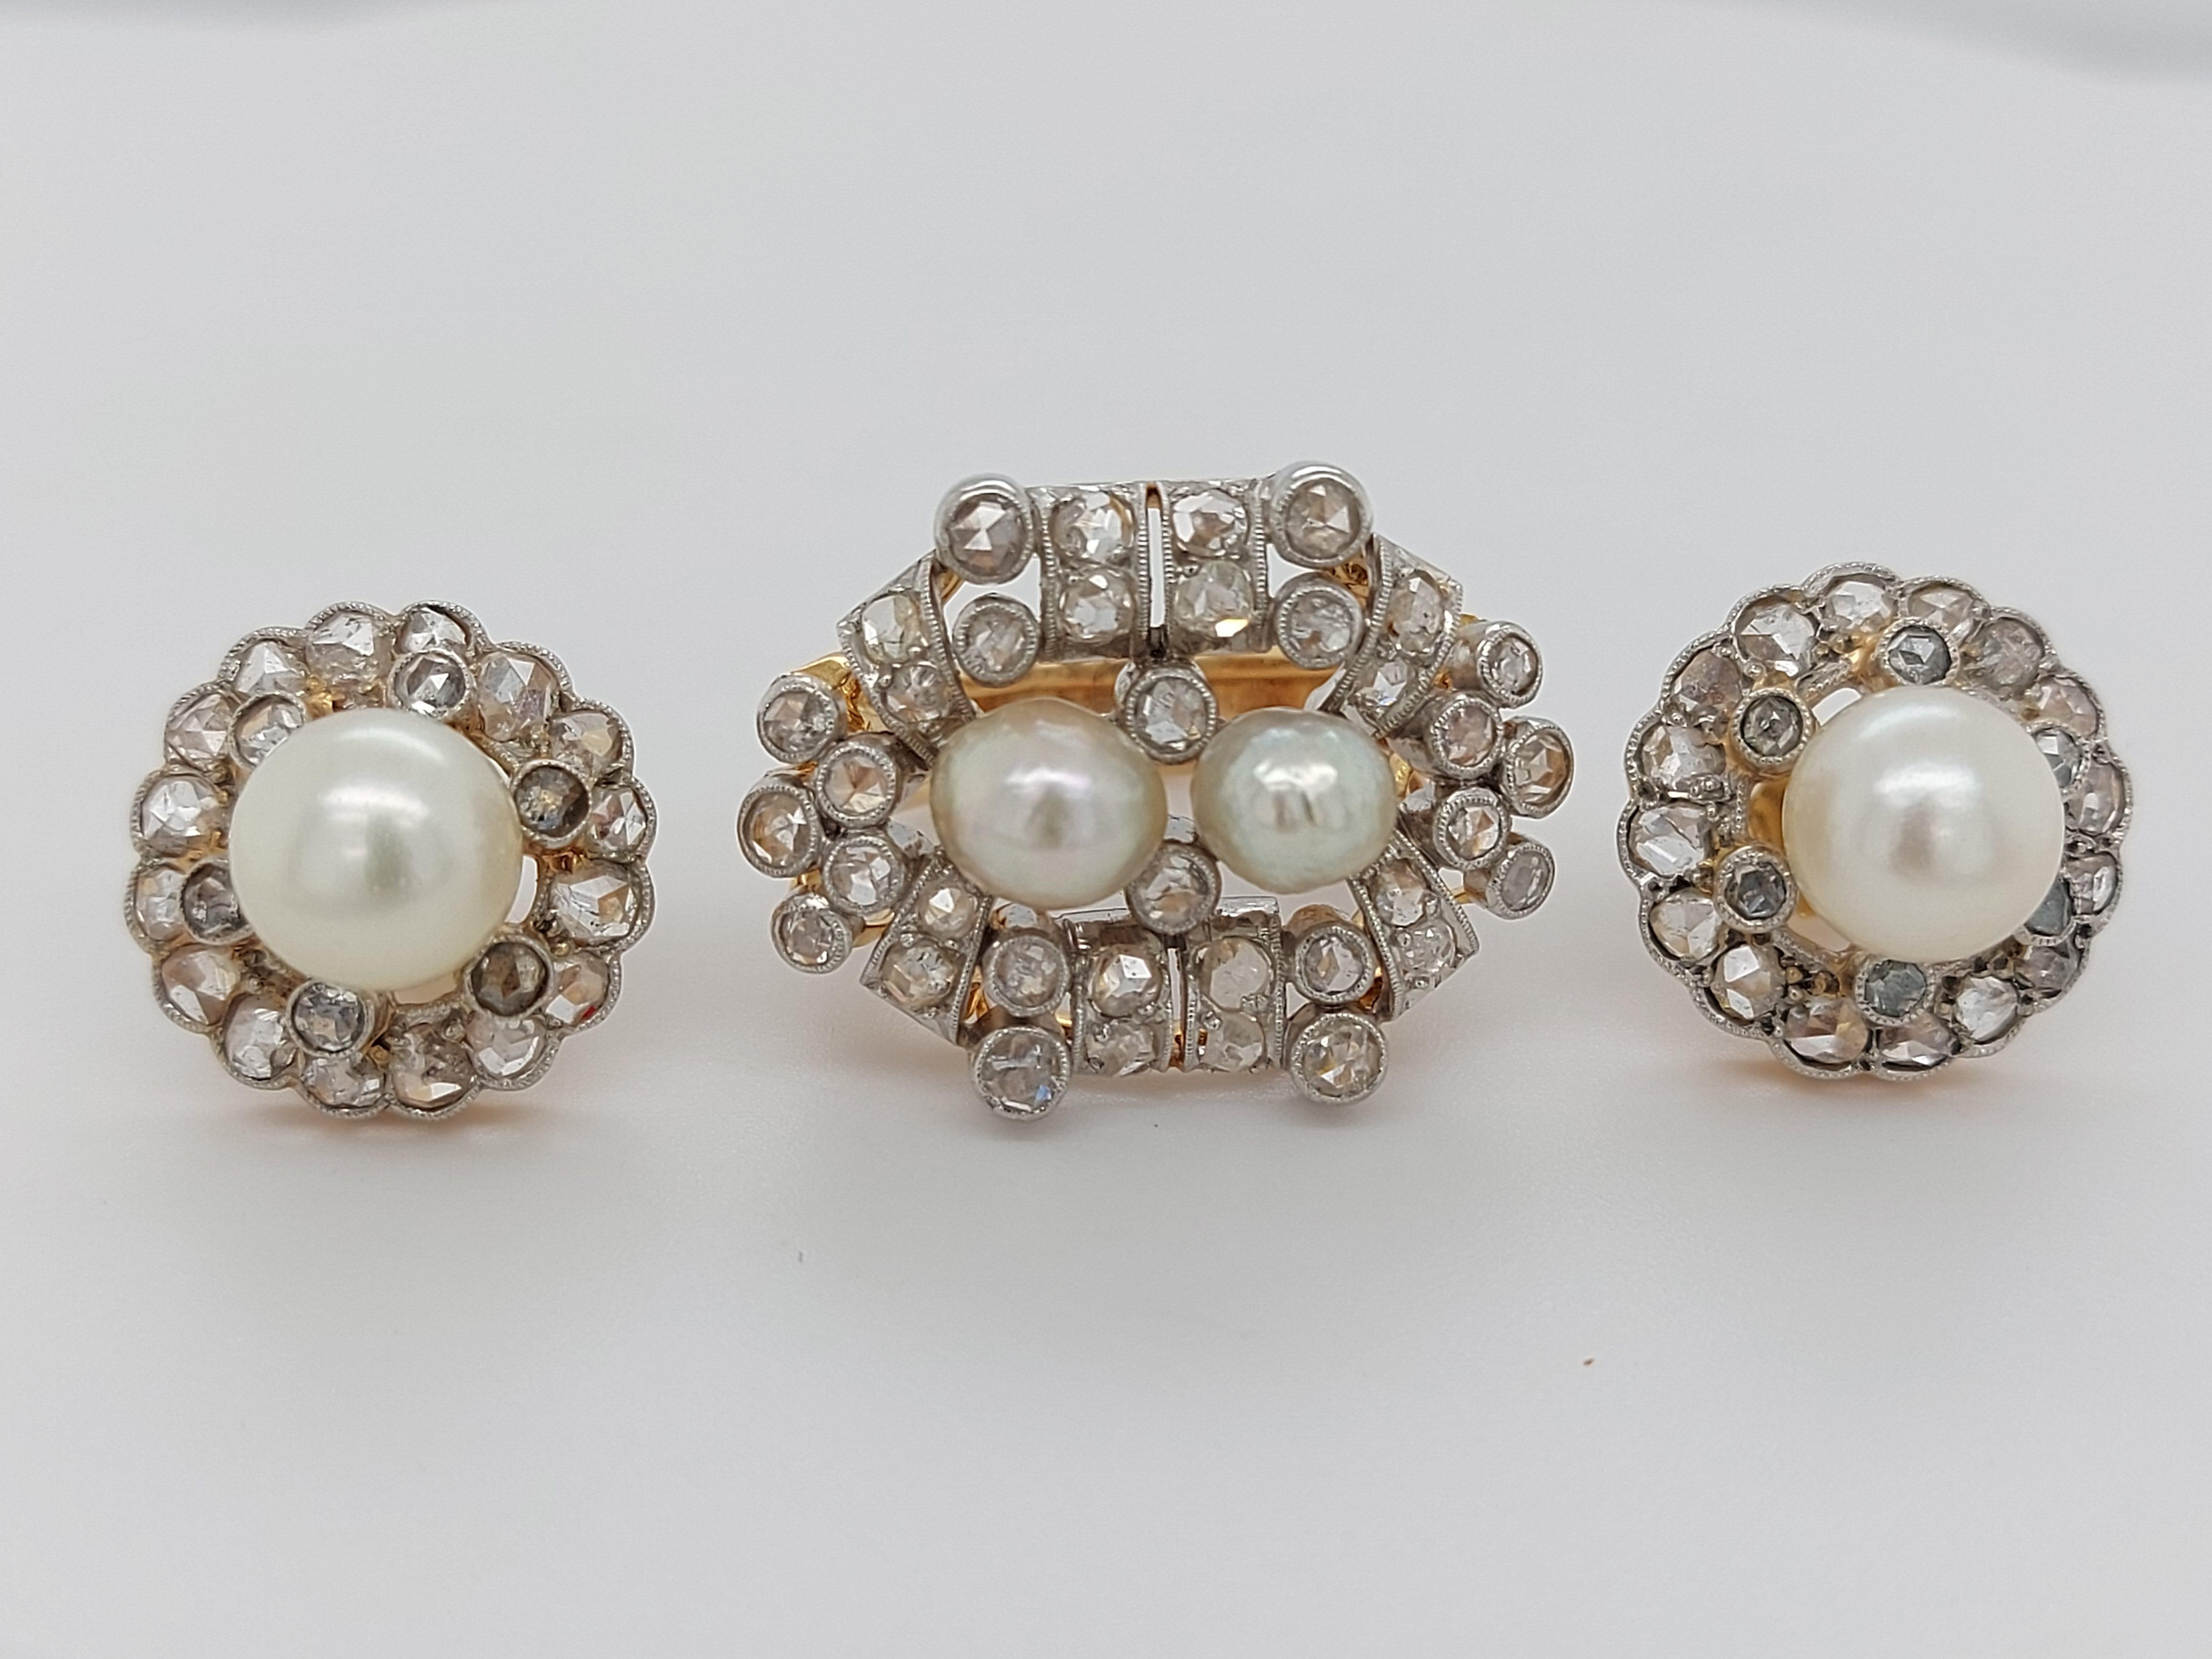 Beautiful Platinum and Gold Ring and Earrings Rose Cut Diamonds and Pearls For Sale 4